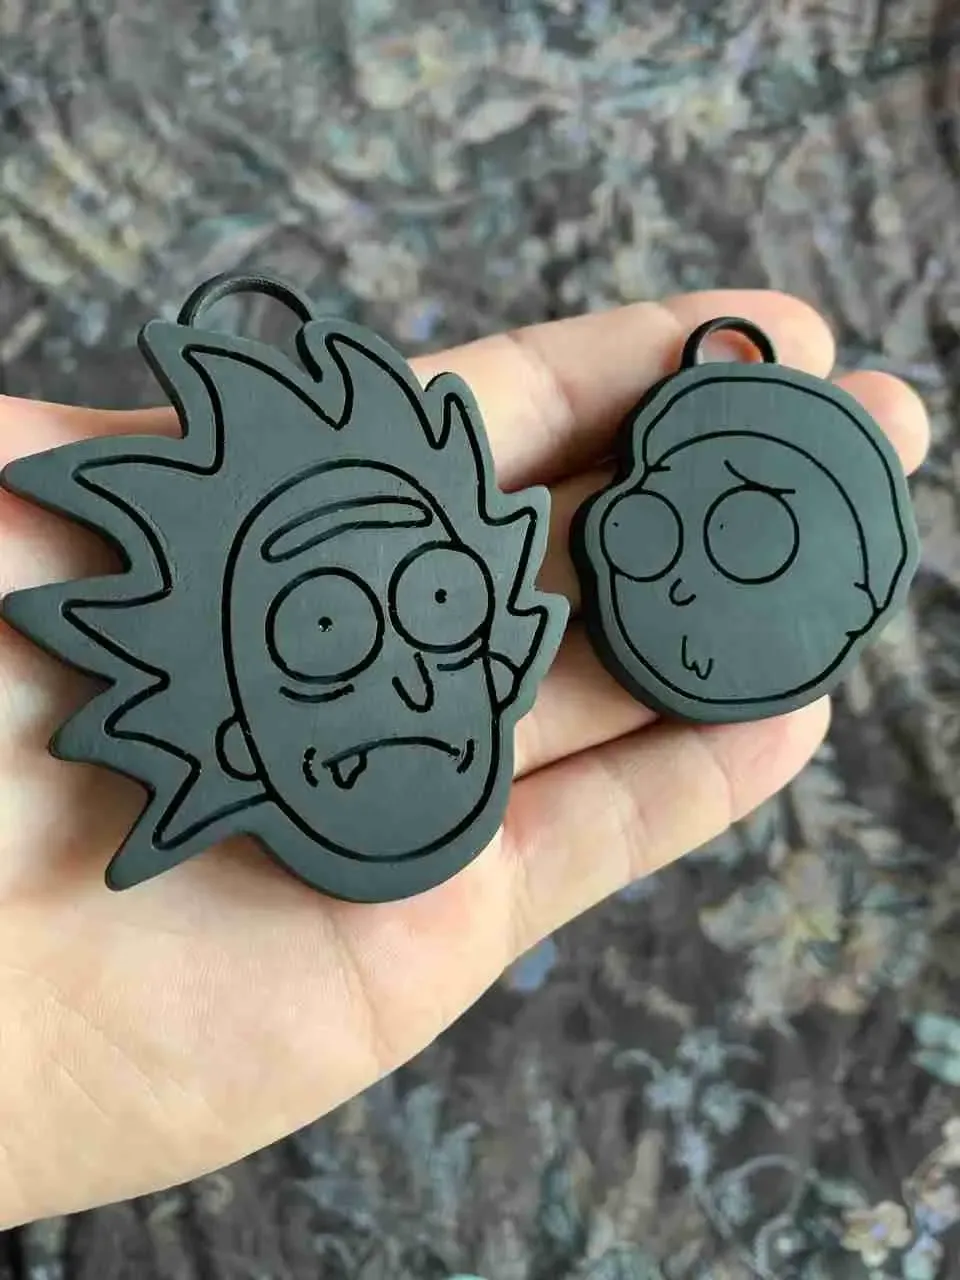 RICK AND MORTY FRIENDSHIP KEYCHAINS